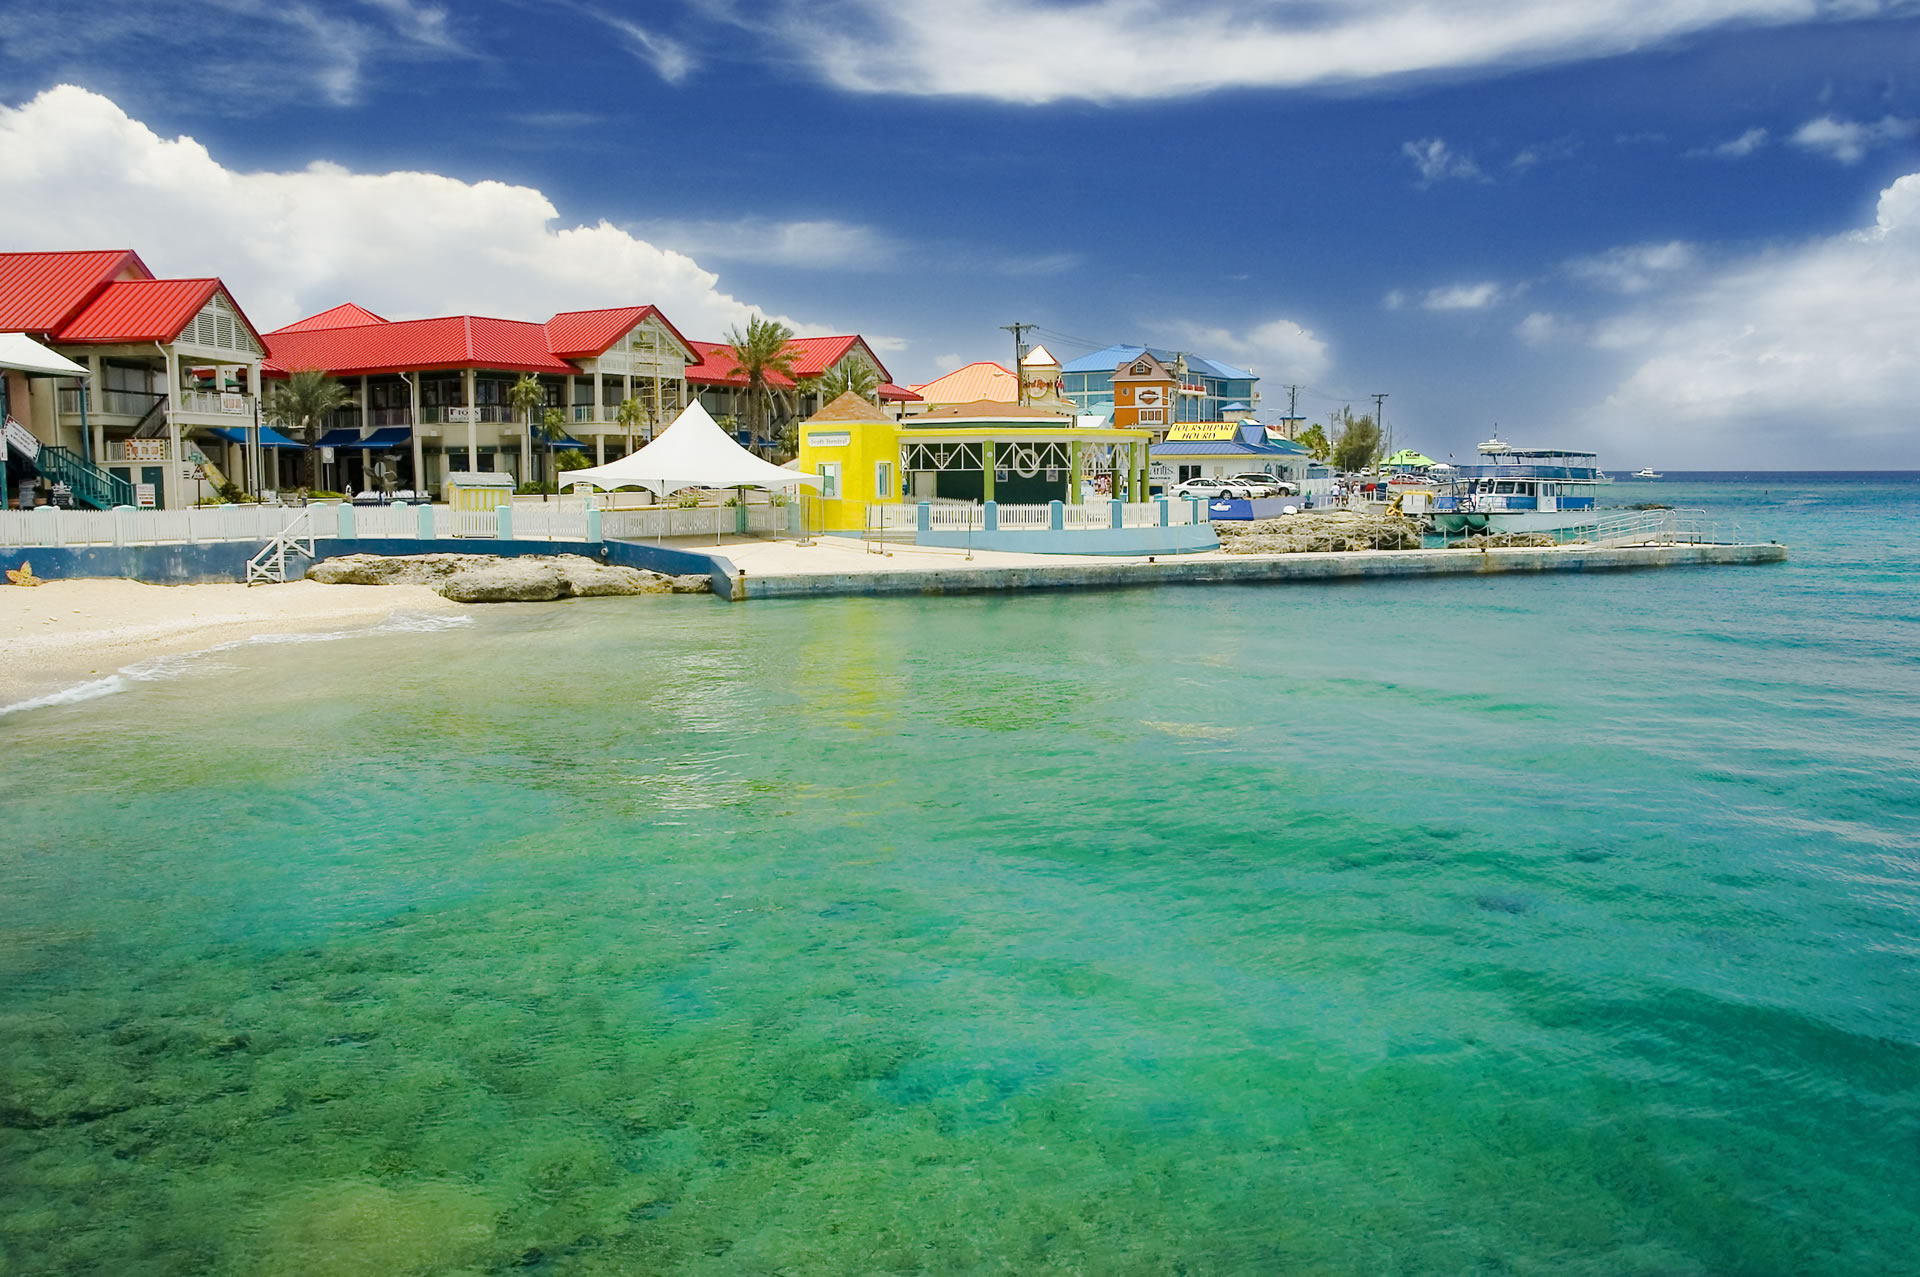 The pristine waters and colorful buildings of George Town, capital of the Cayman Islands.